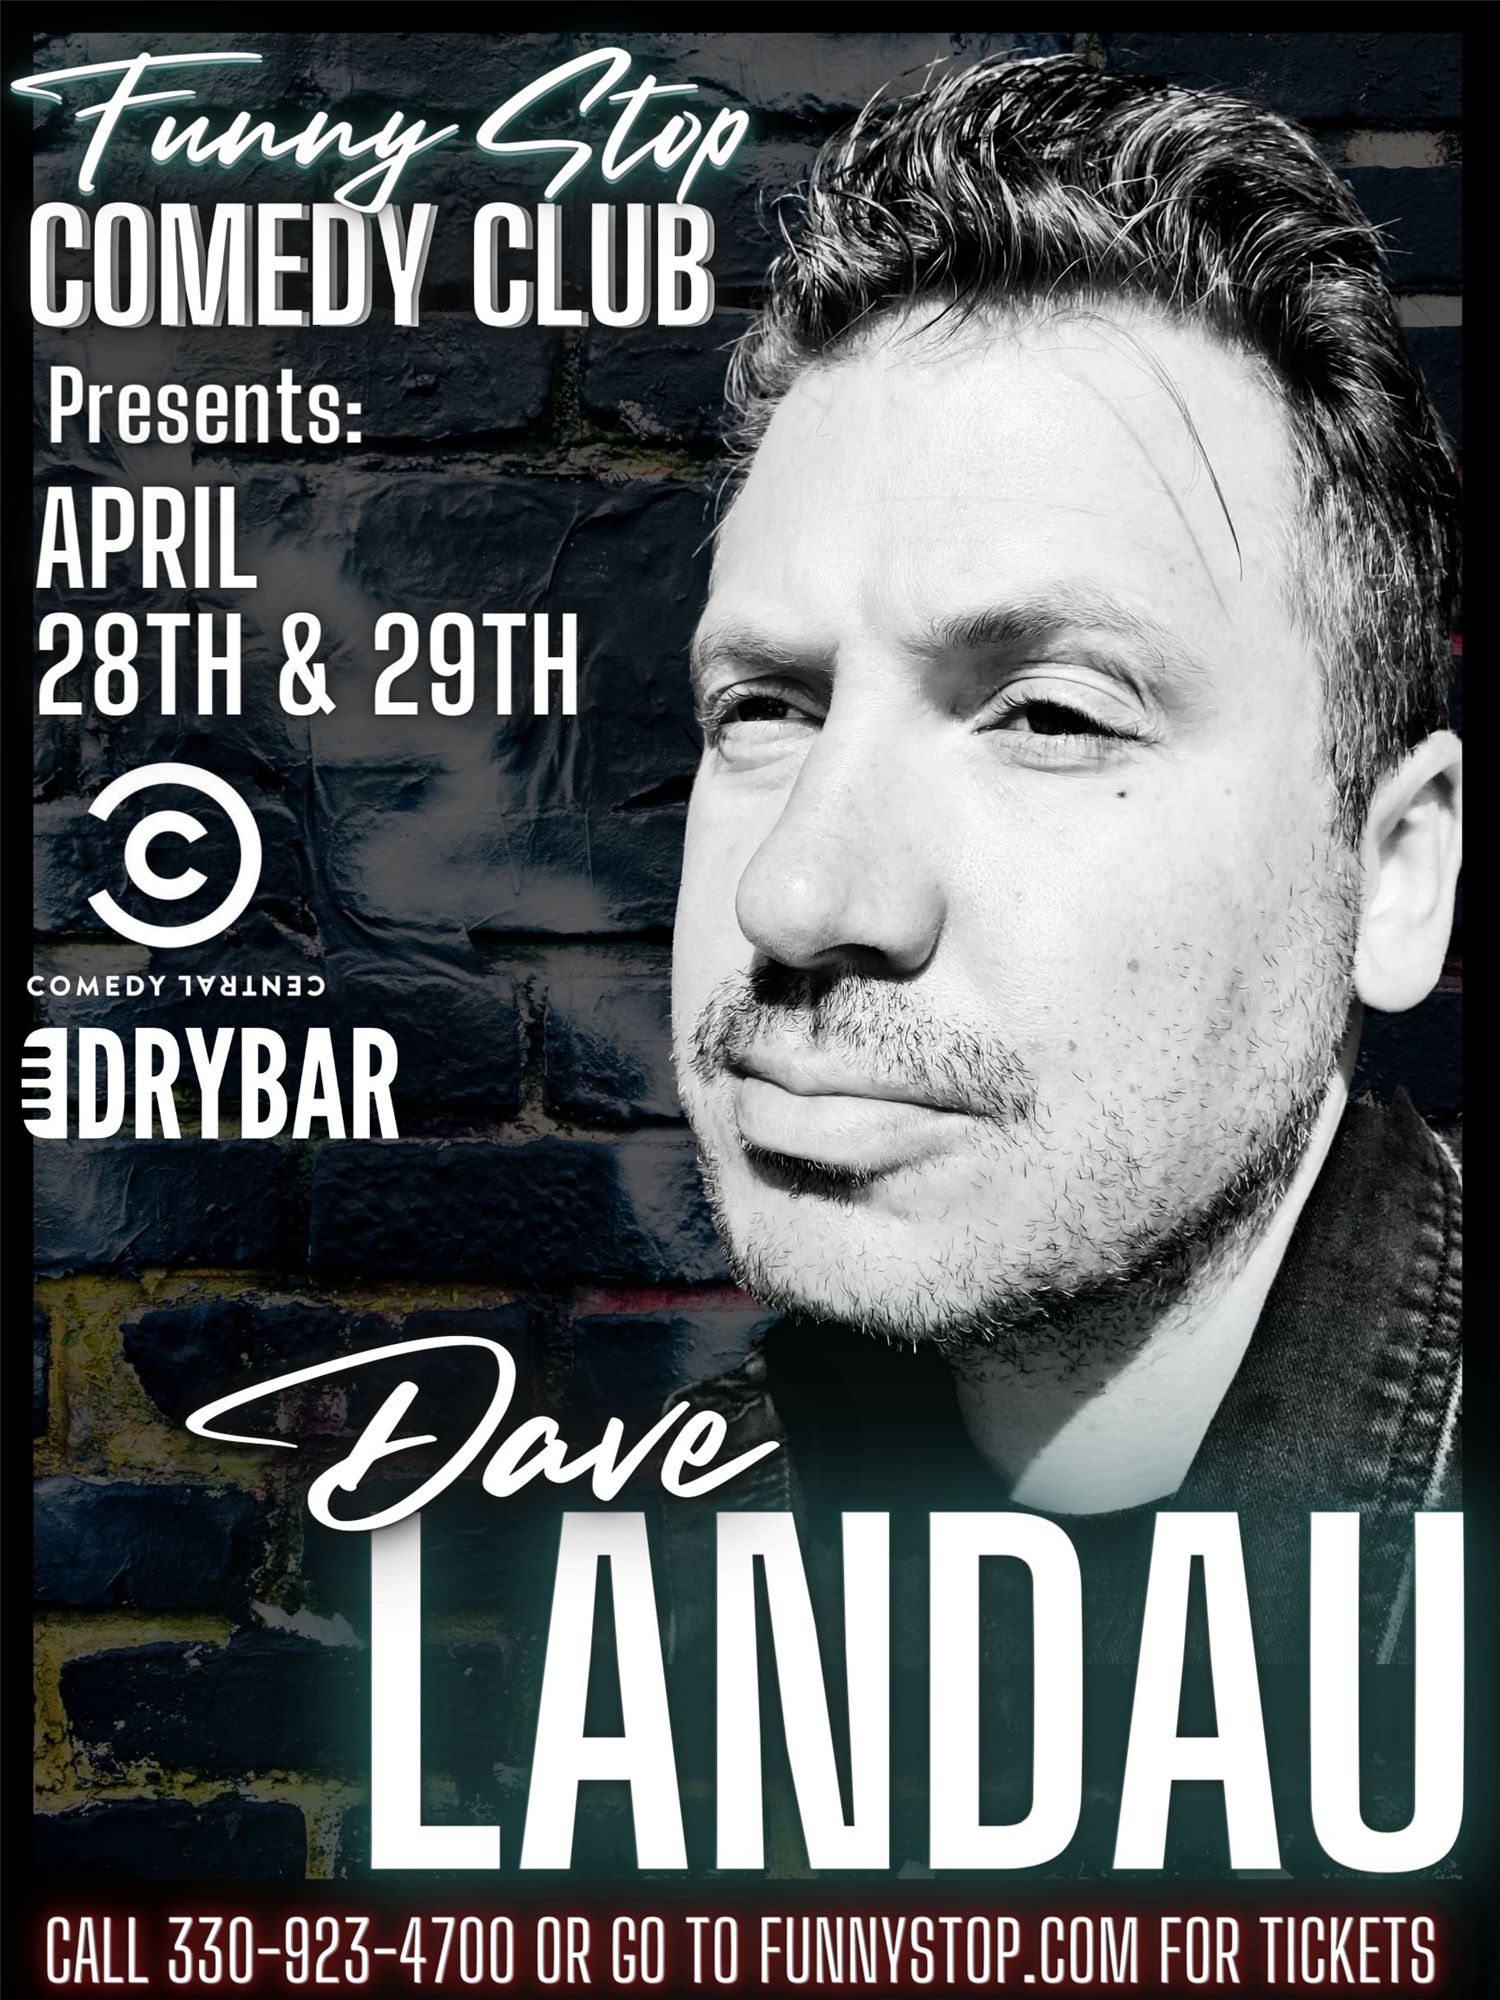 Dave Landau Sat. 9:30 Show Funny Stop Comedy Club on Apr 29, 21:30@Funny Stop Comedy Club - Buy tickets and Get information on Funny Stop funnystop.online